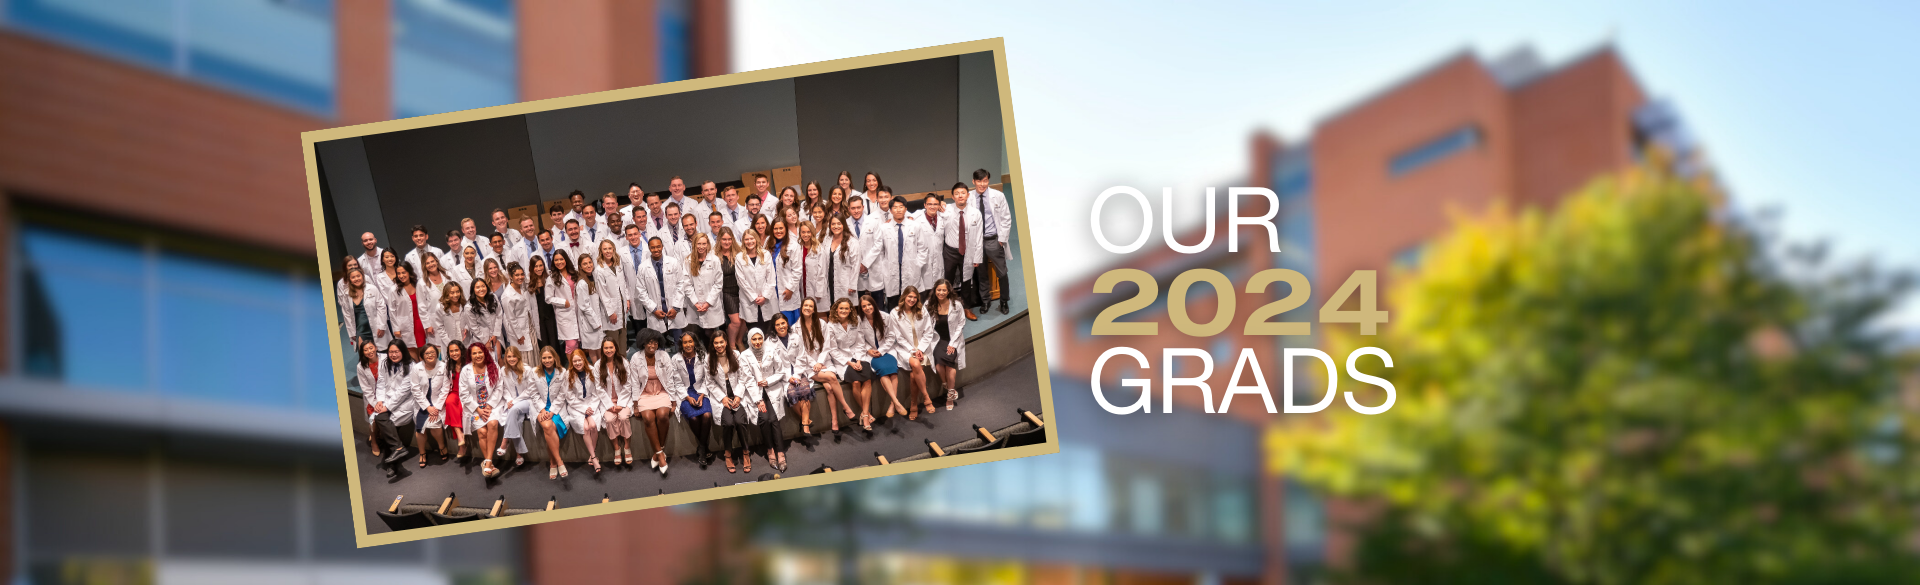 Large group photo of dental students in their white coats with text Our 2024 Grads 